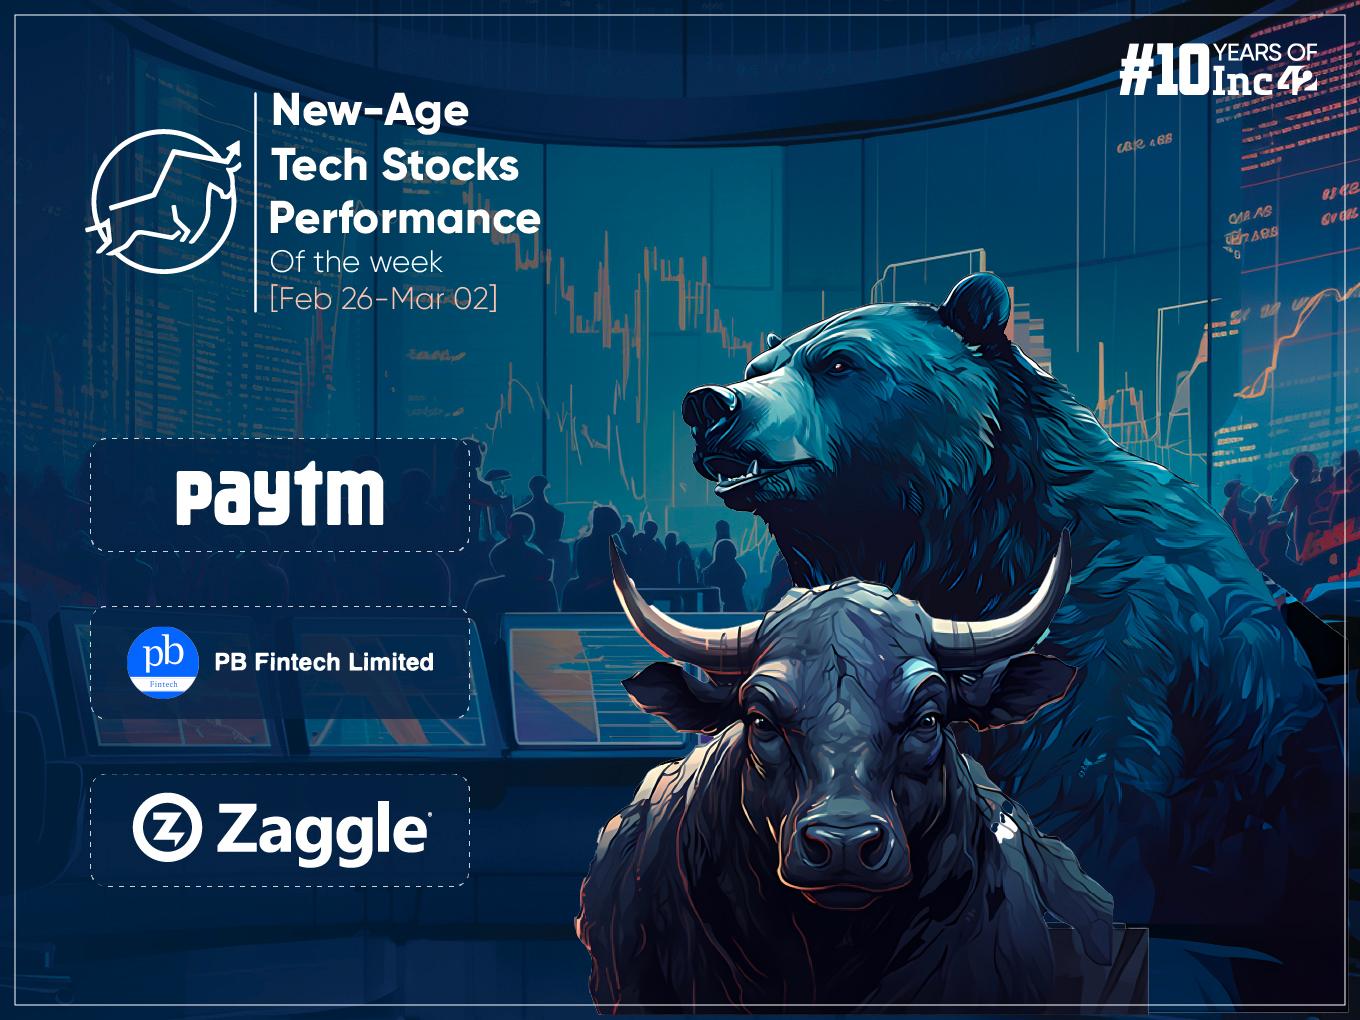 New-Age Tech Stocks Regain Momentum; Zaggle Emerges As The Biggest Gainer This Week